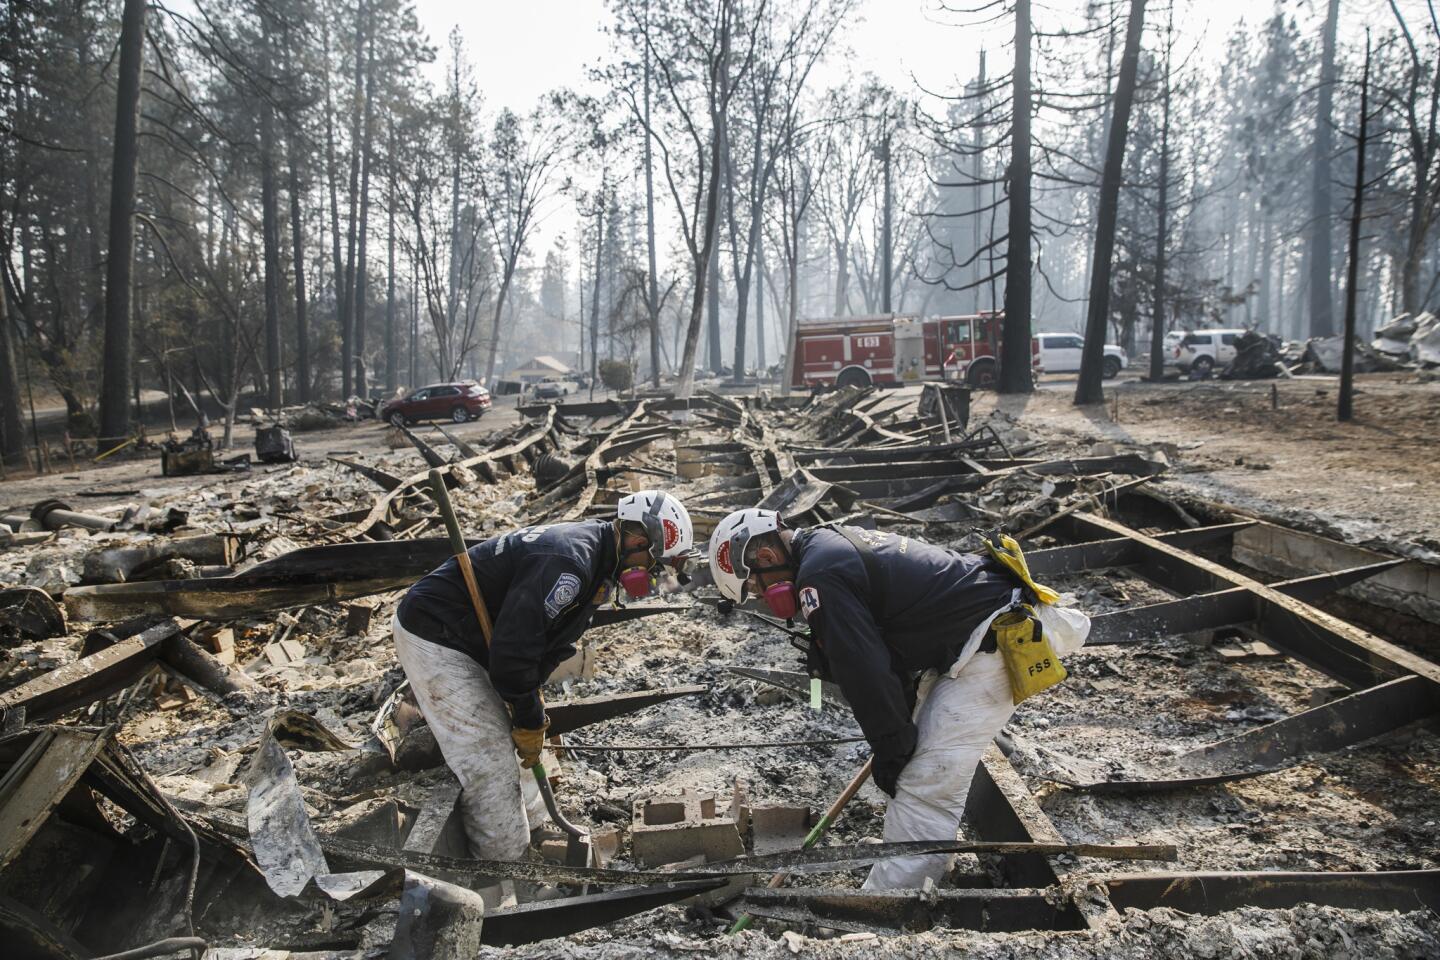 A search-and-rescue team carefully scans the area where there might be human remains after the Camp fire destroyed most of Paradise, Calif.